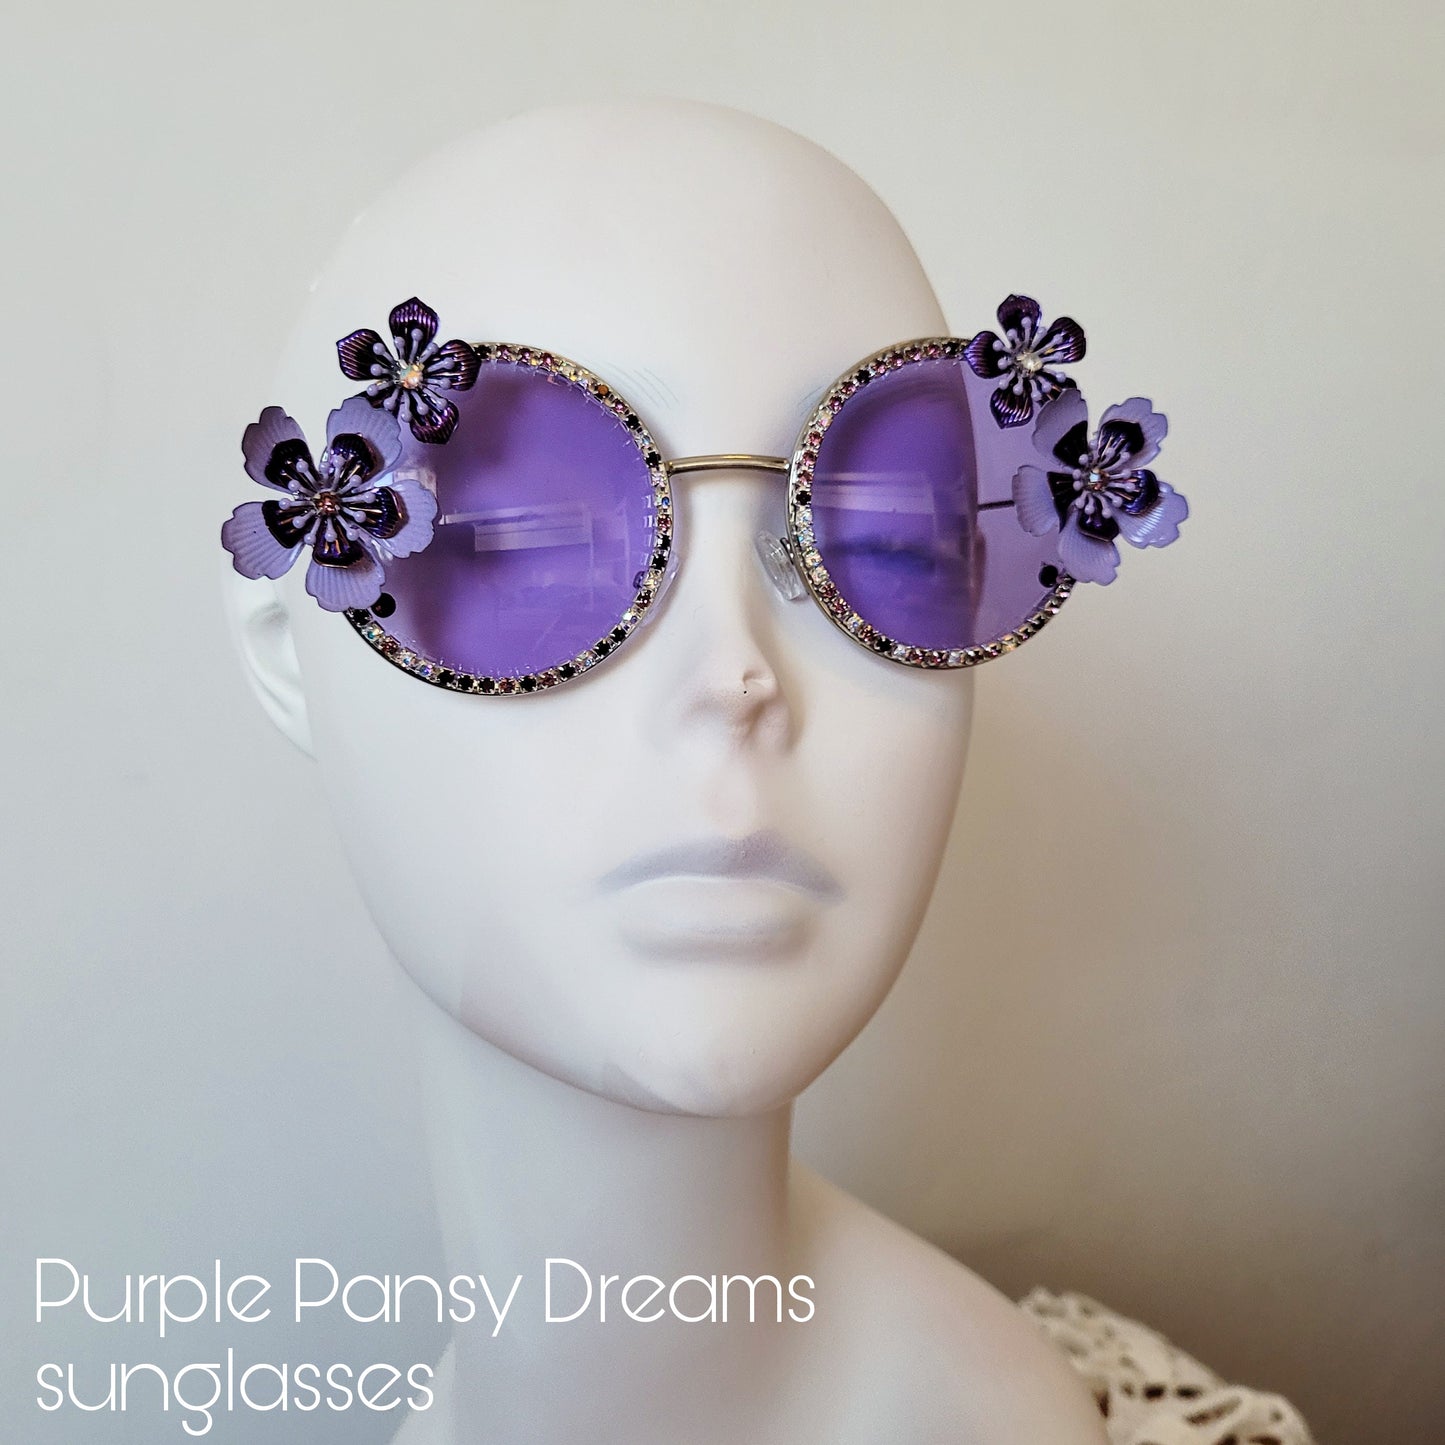 Bumblebee Dreams collection: the Purple Pansy Dreams Sunglasses